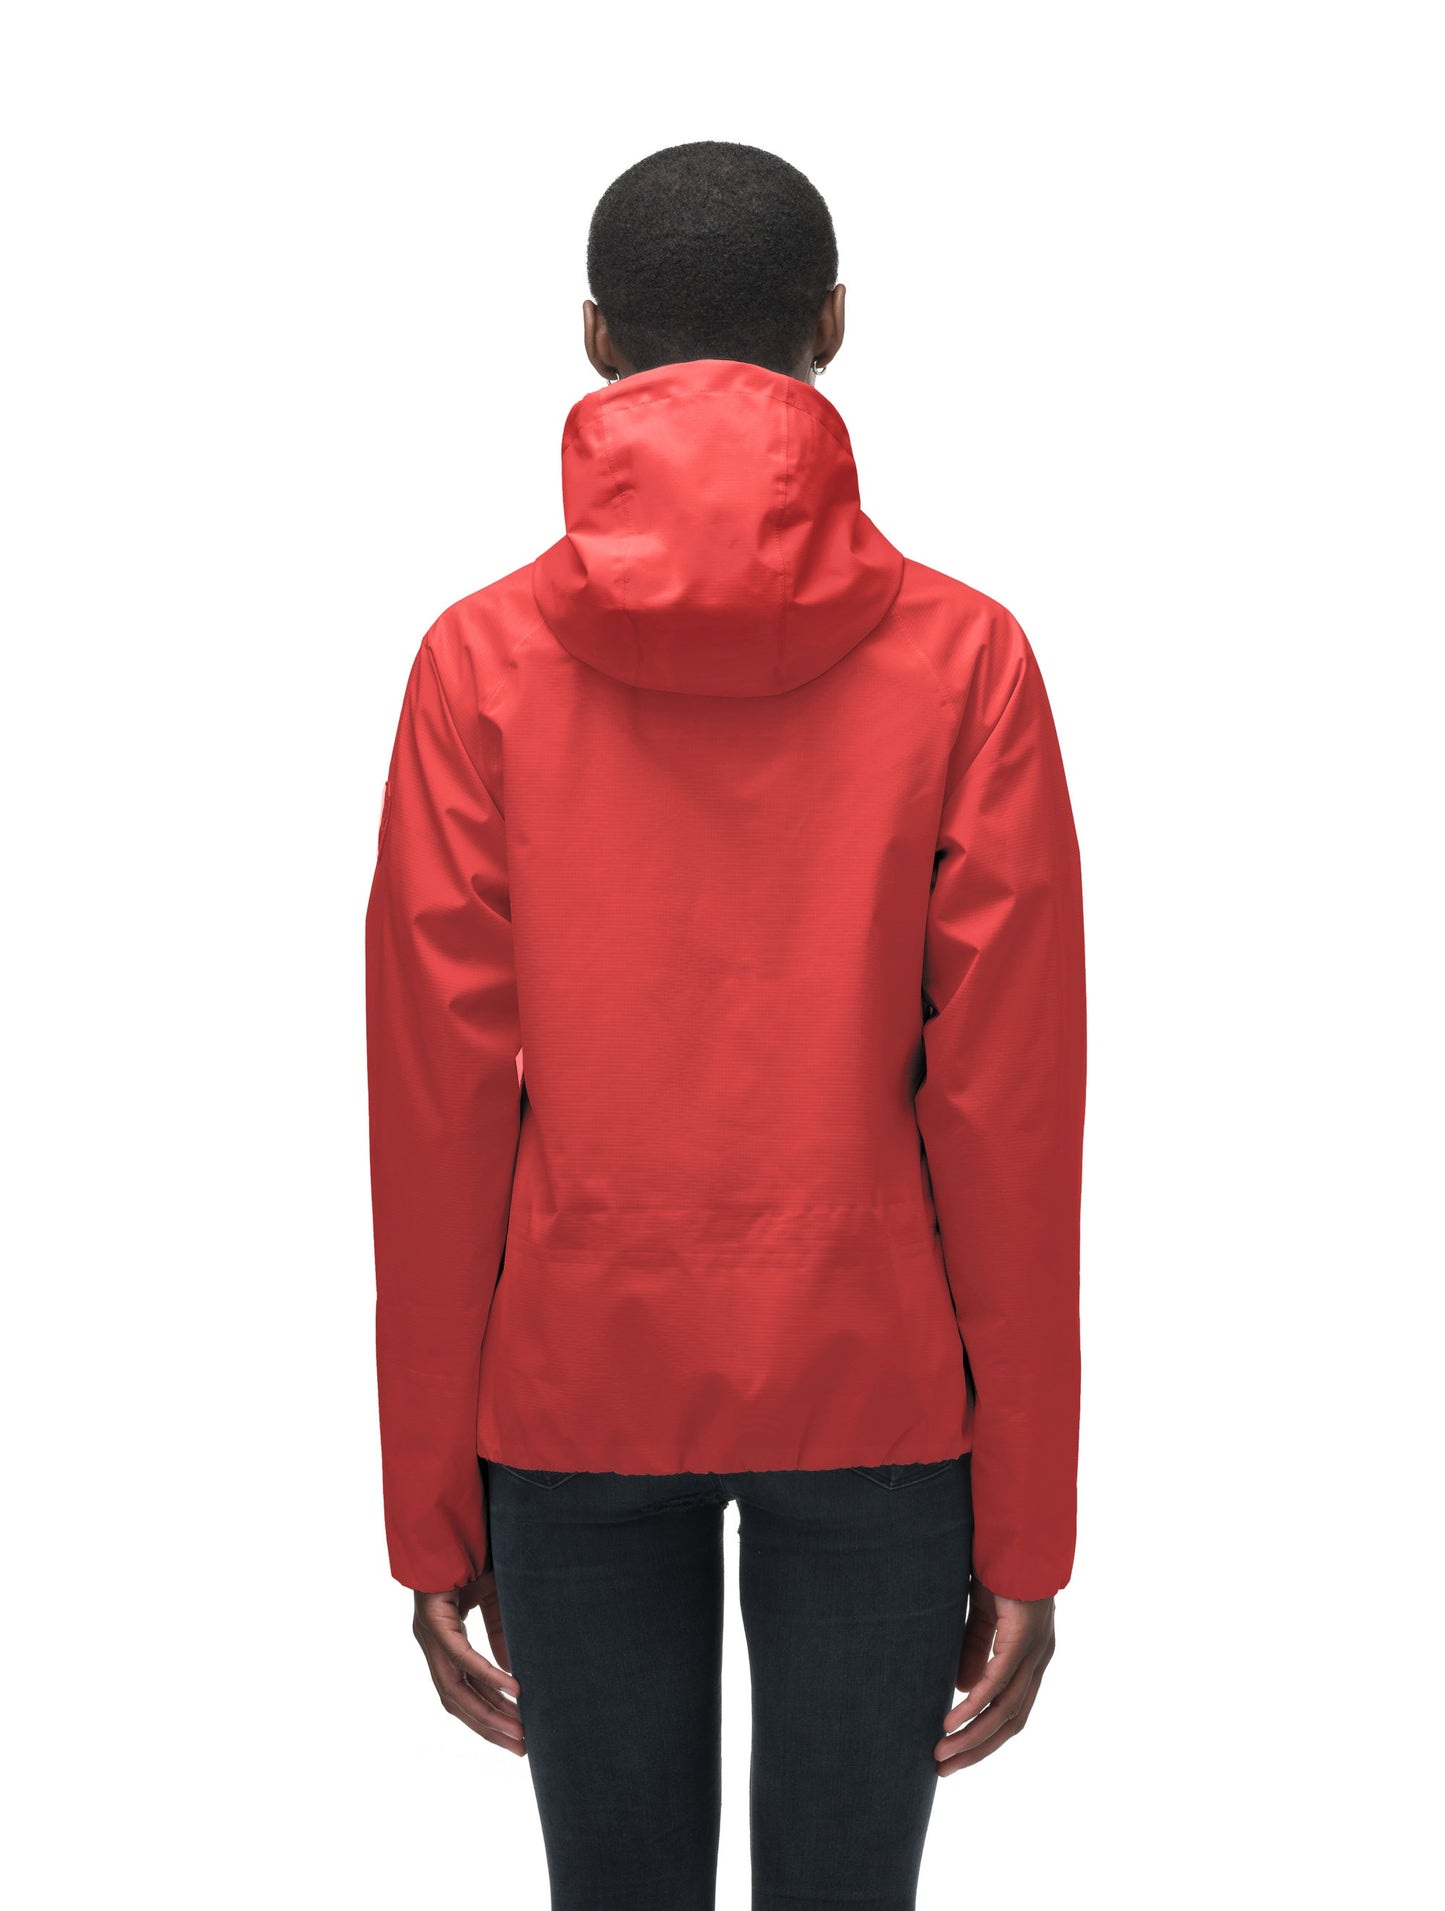 Women's hip length waterproof jacket with non-removable hood and two-way zipper in Vermillion